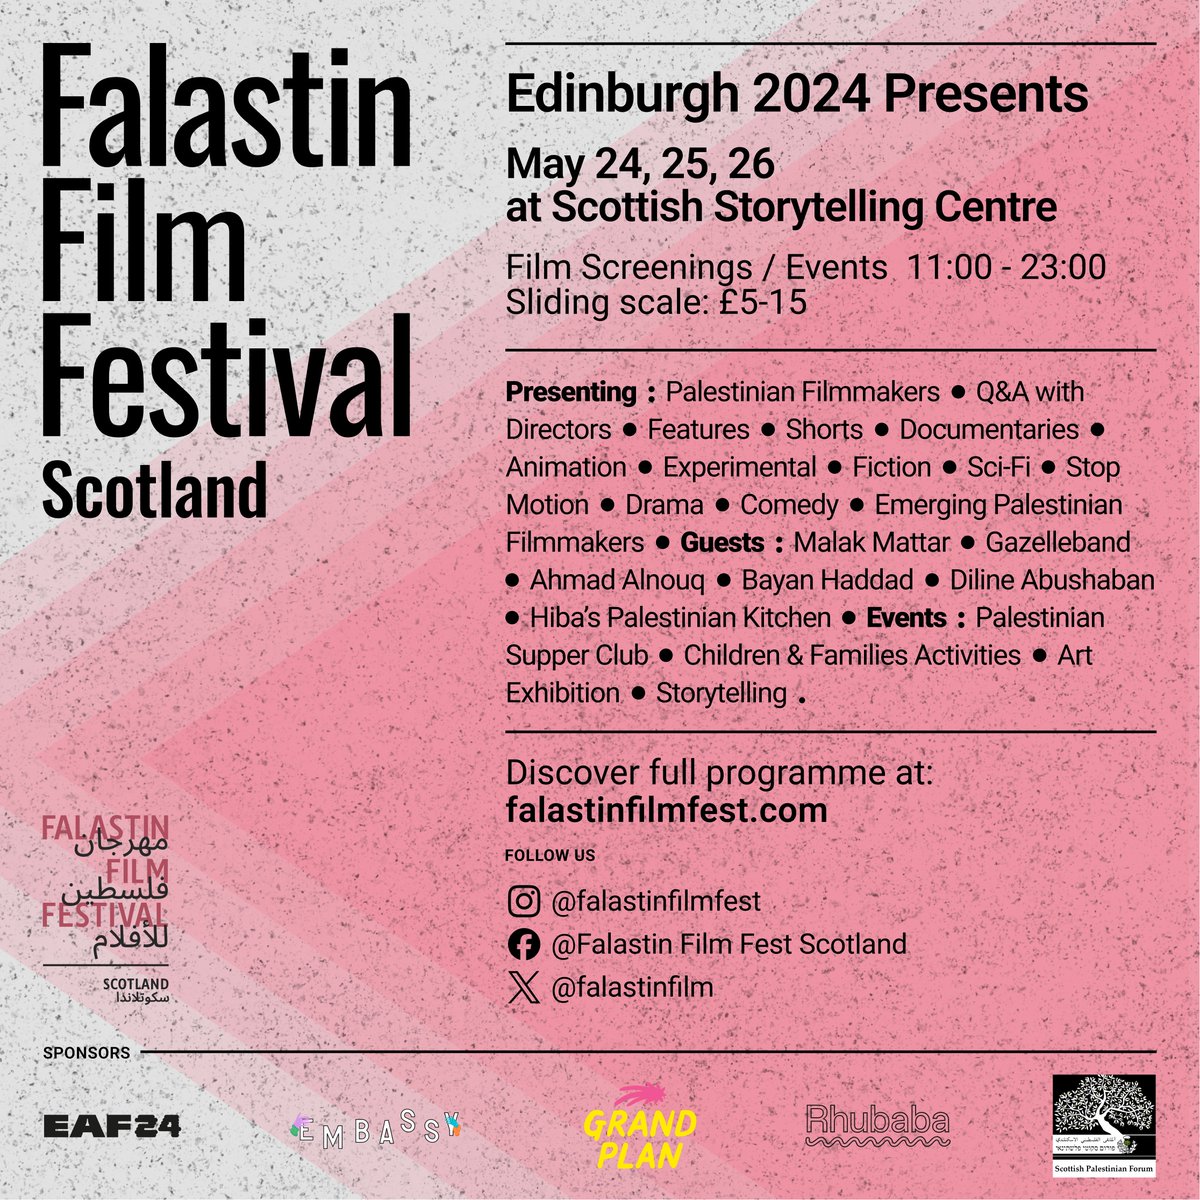 FFF team is thrilled to present Falastin Film Festival Edinburgh 2024 programme! 📌 @ScotStoryCentre 🗓️ May 24-26 ⏲️ Screenings and events from 11am until 11 pm everyday. For the full program, visit falastinfilmfest.com and secure your tickets today!